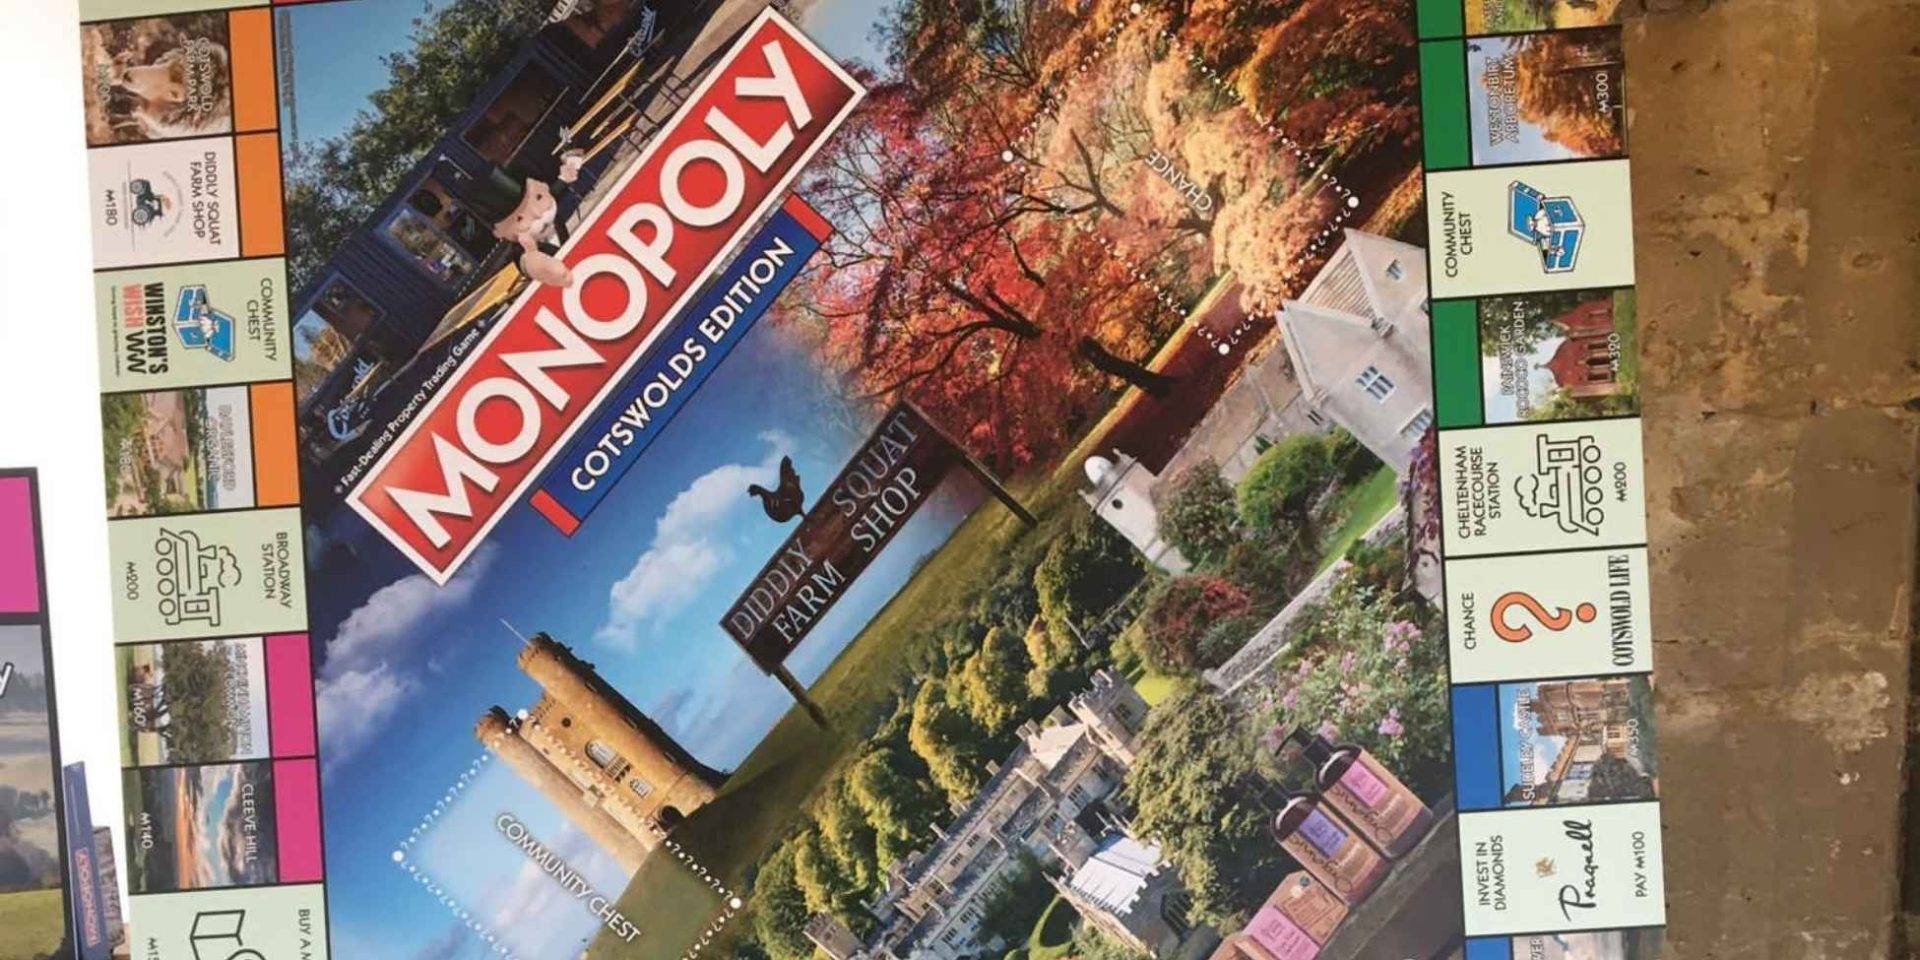 Cotswolds version of Monopoly